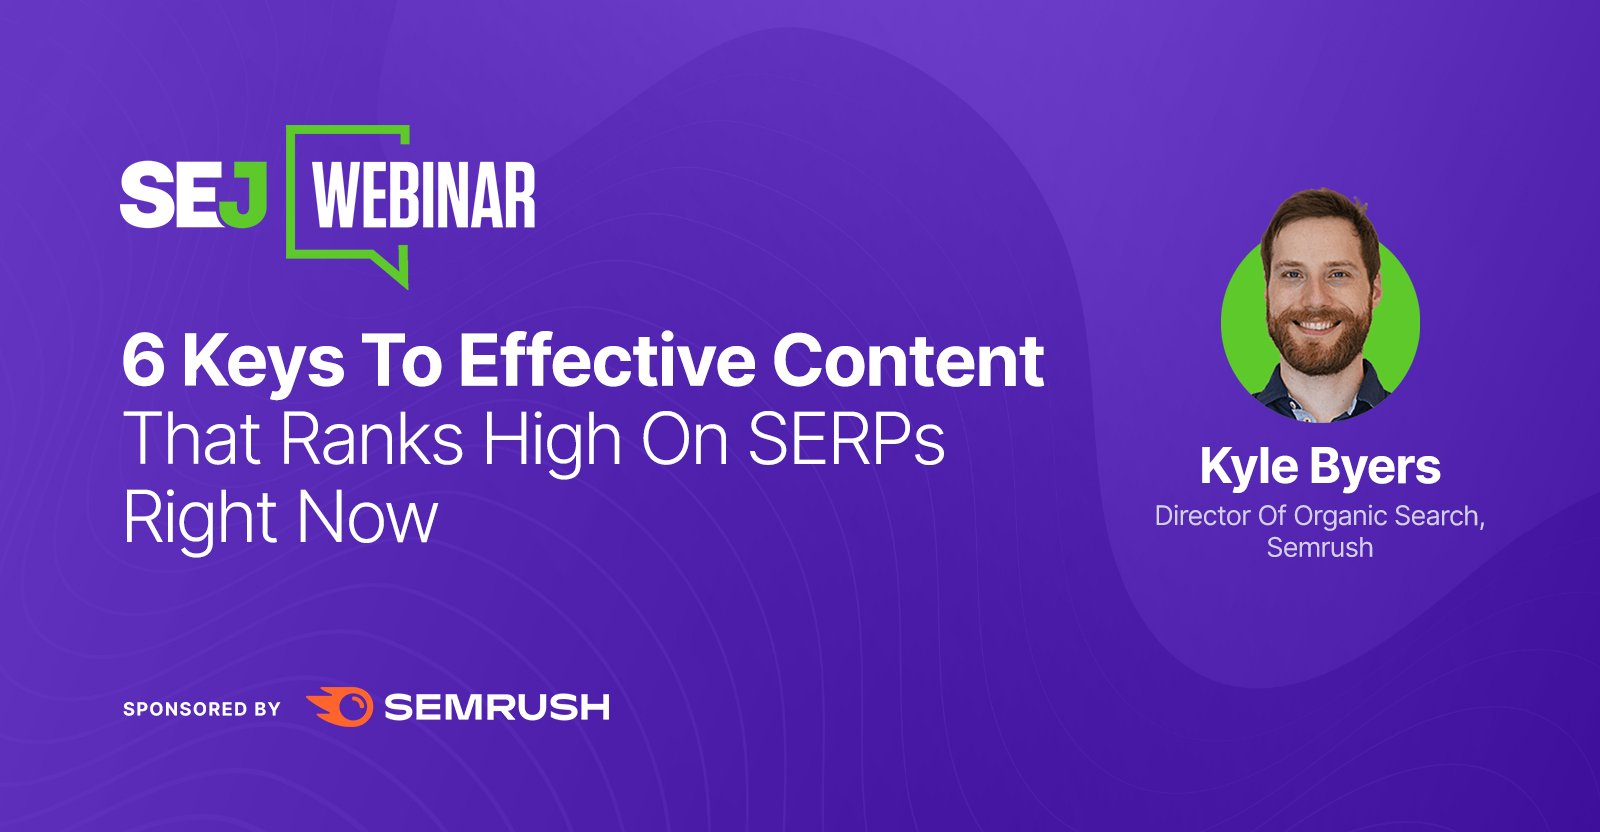 6 Keys To Efficient Content material That Ranks Excessive On SERPs [Webinar]